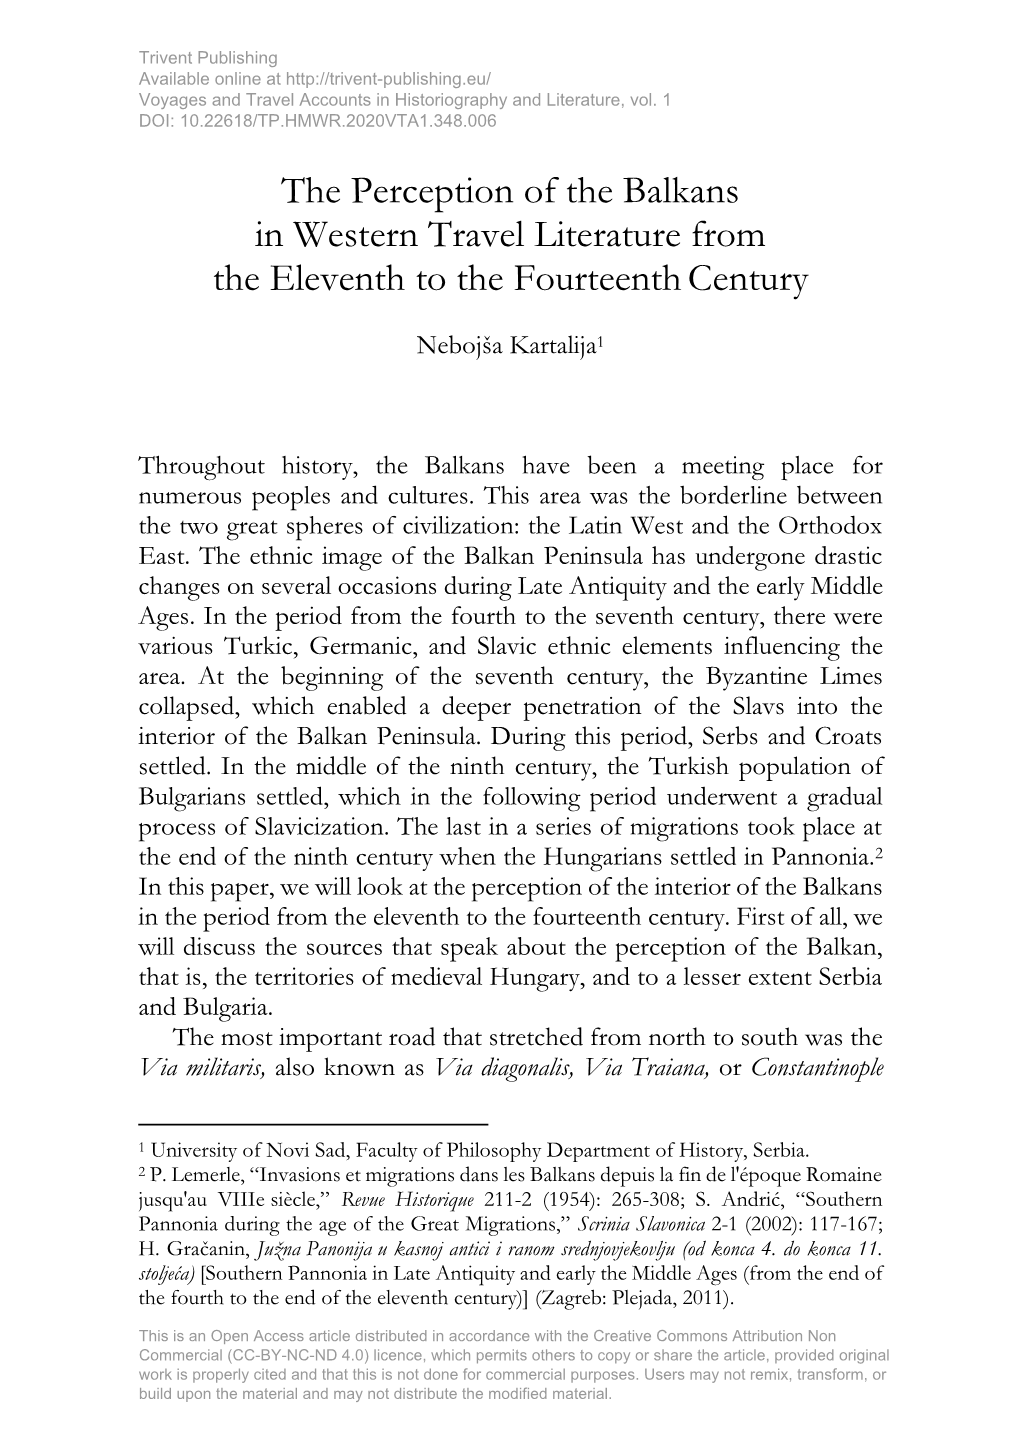 The Perception of the Balkans in Western Travel Literature from the Eleventh to the Fourteenth Century